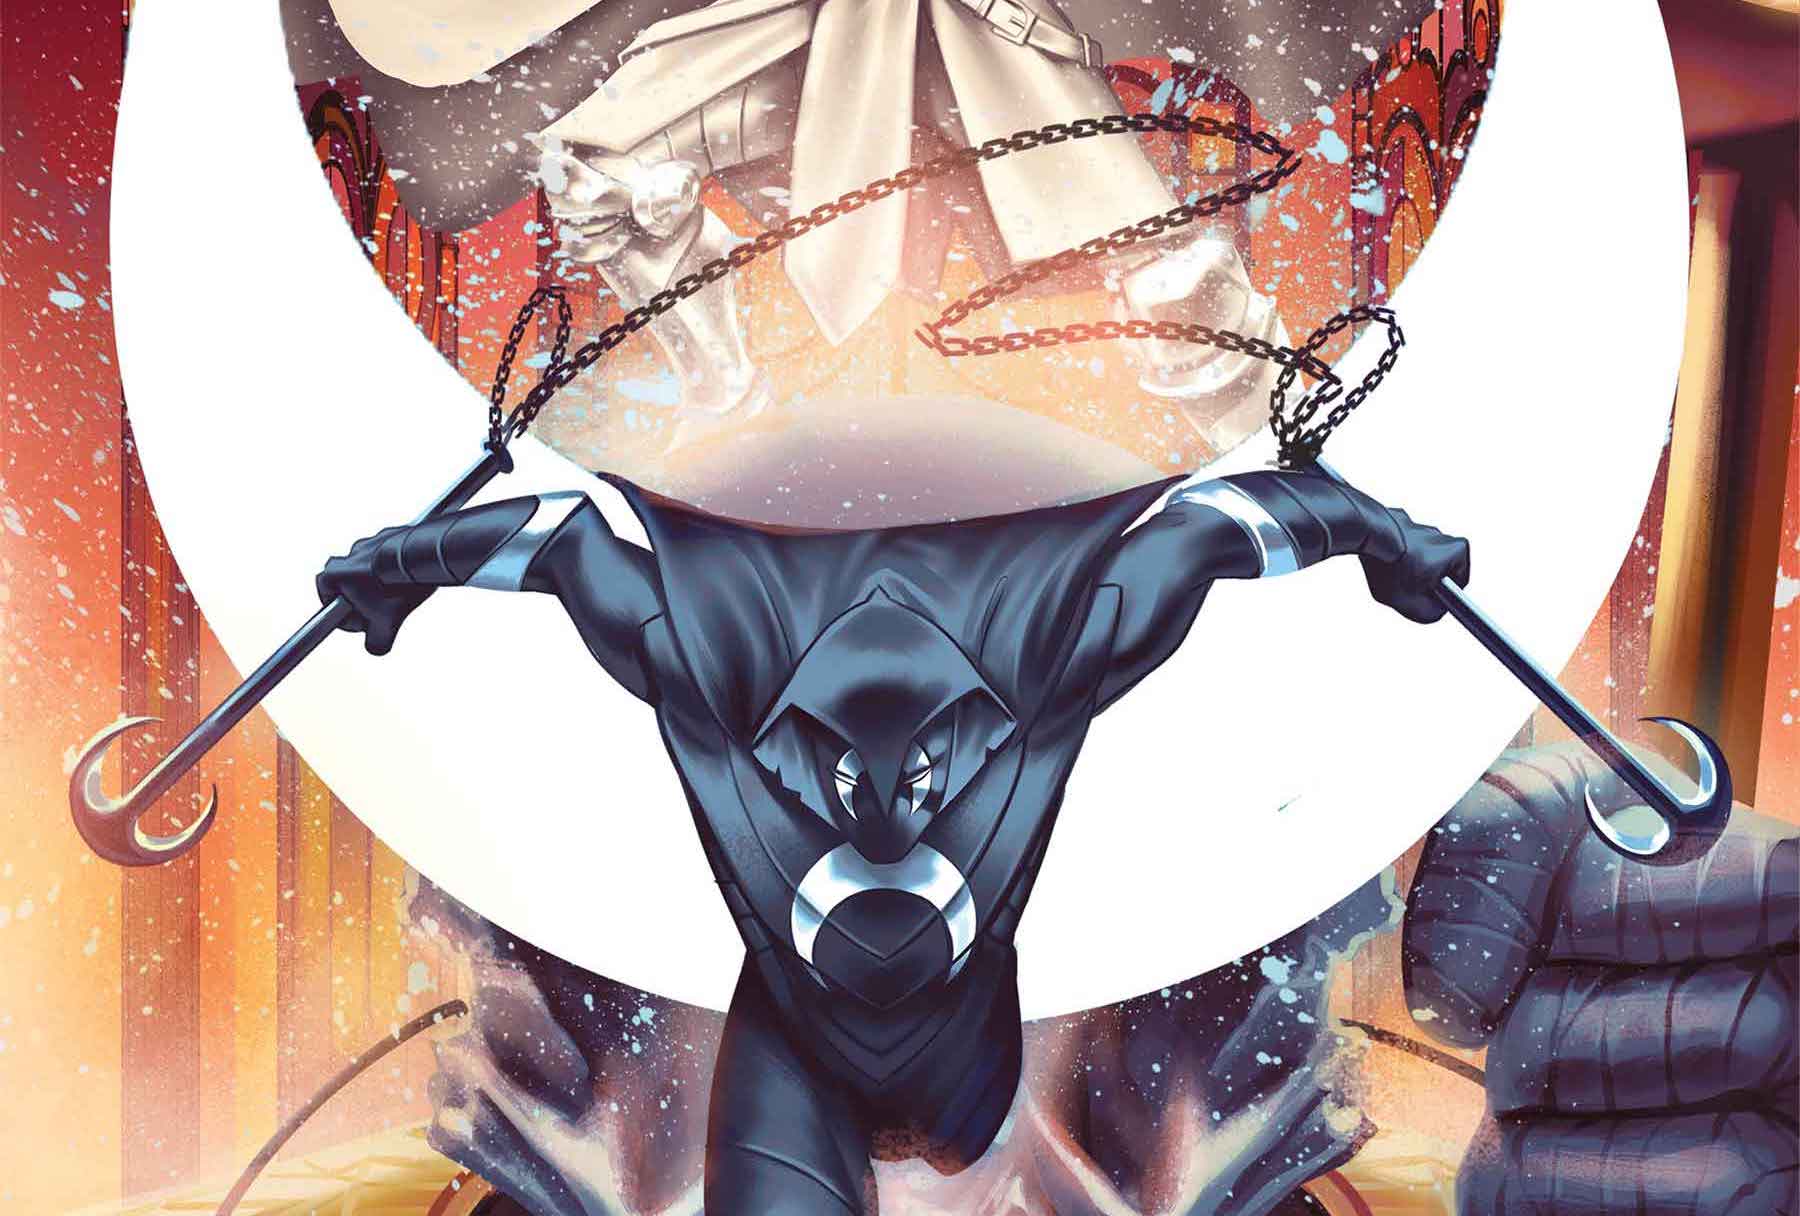 'Phases of the Moon Knight' #1 announced